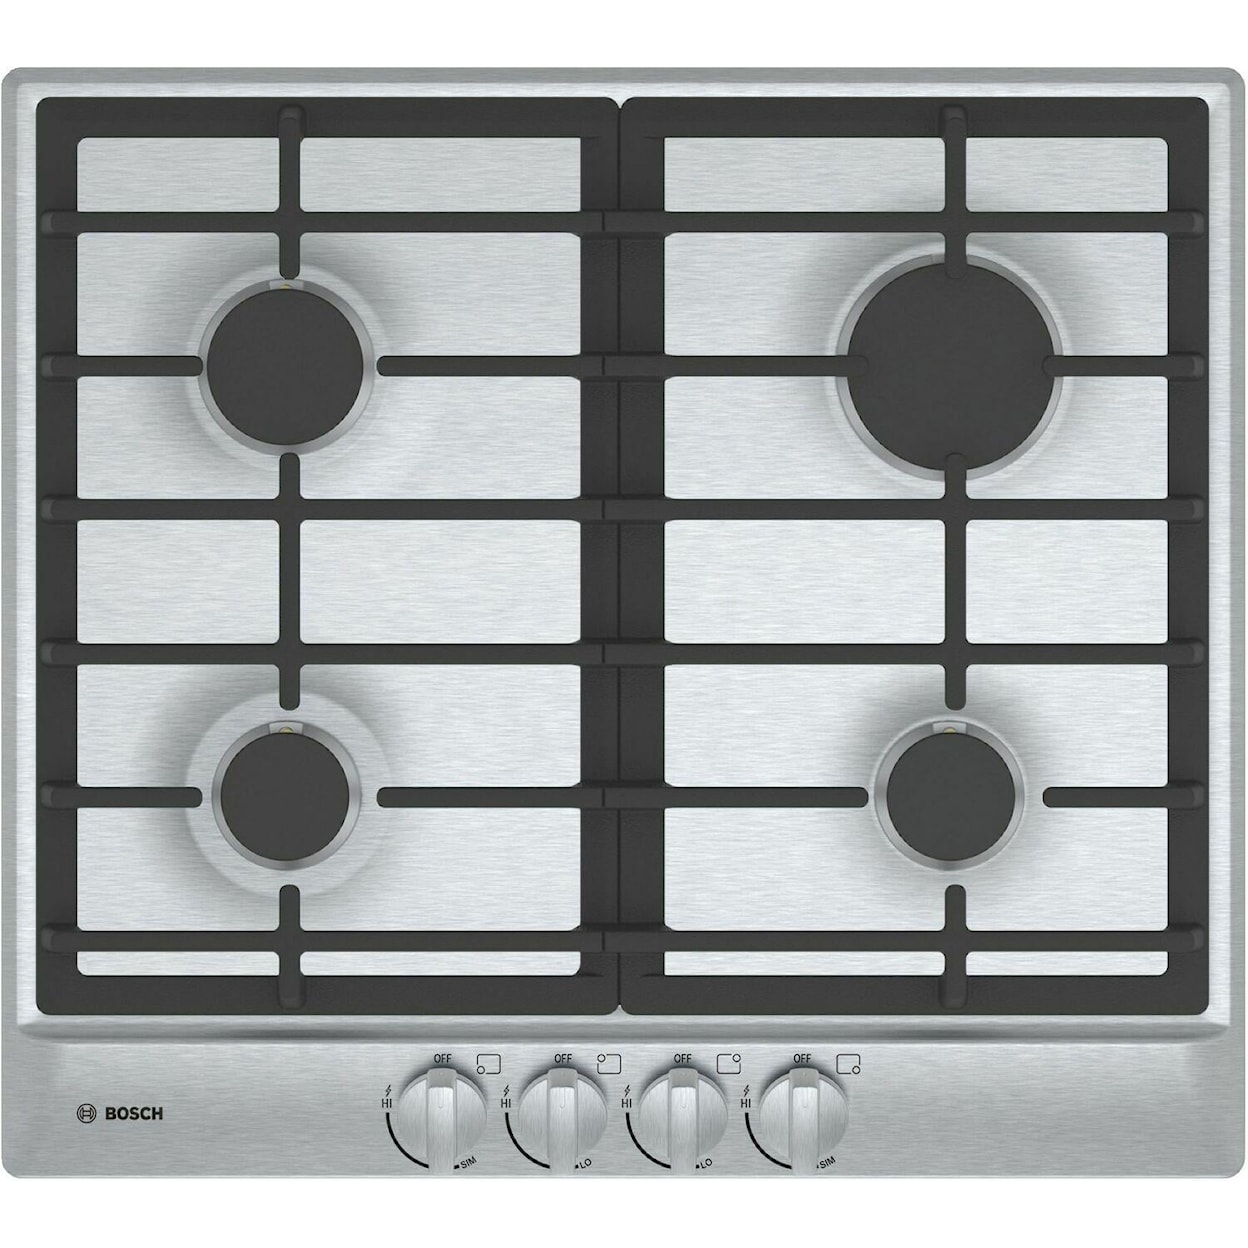 Ngm5058uc Bosch 30 500 Series GAS Cooktop - Stainless Steel